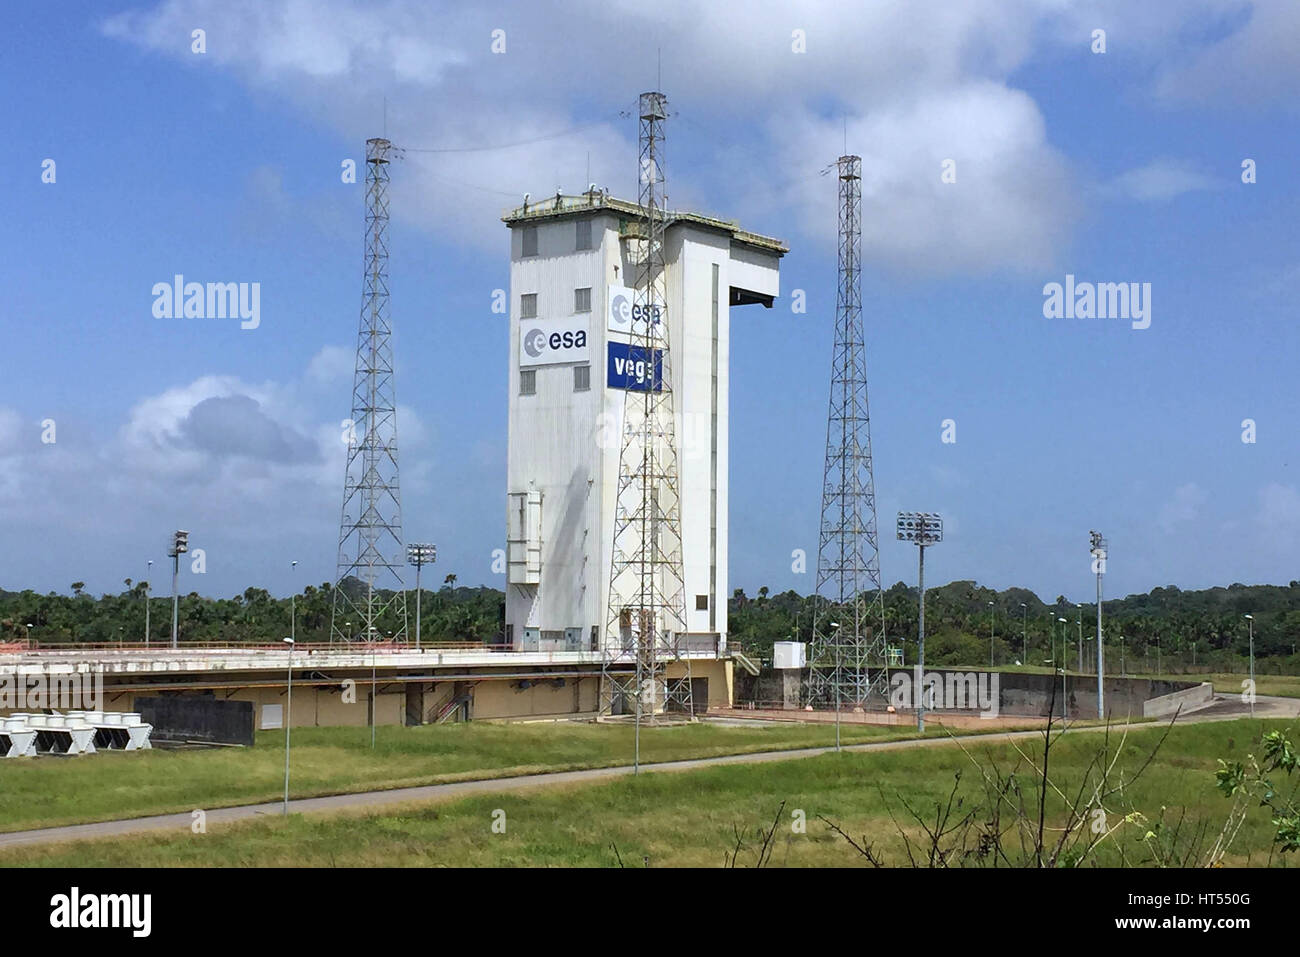 The Sentinel 2B launch pad showing the housing encasing the Vega rocket that later blasted the satellite into orbit from the European Space Agency (ESA) base at Kourou, French Guiana. Stock Photo